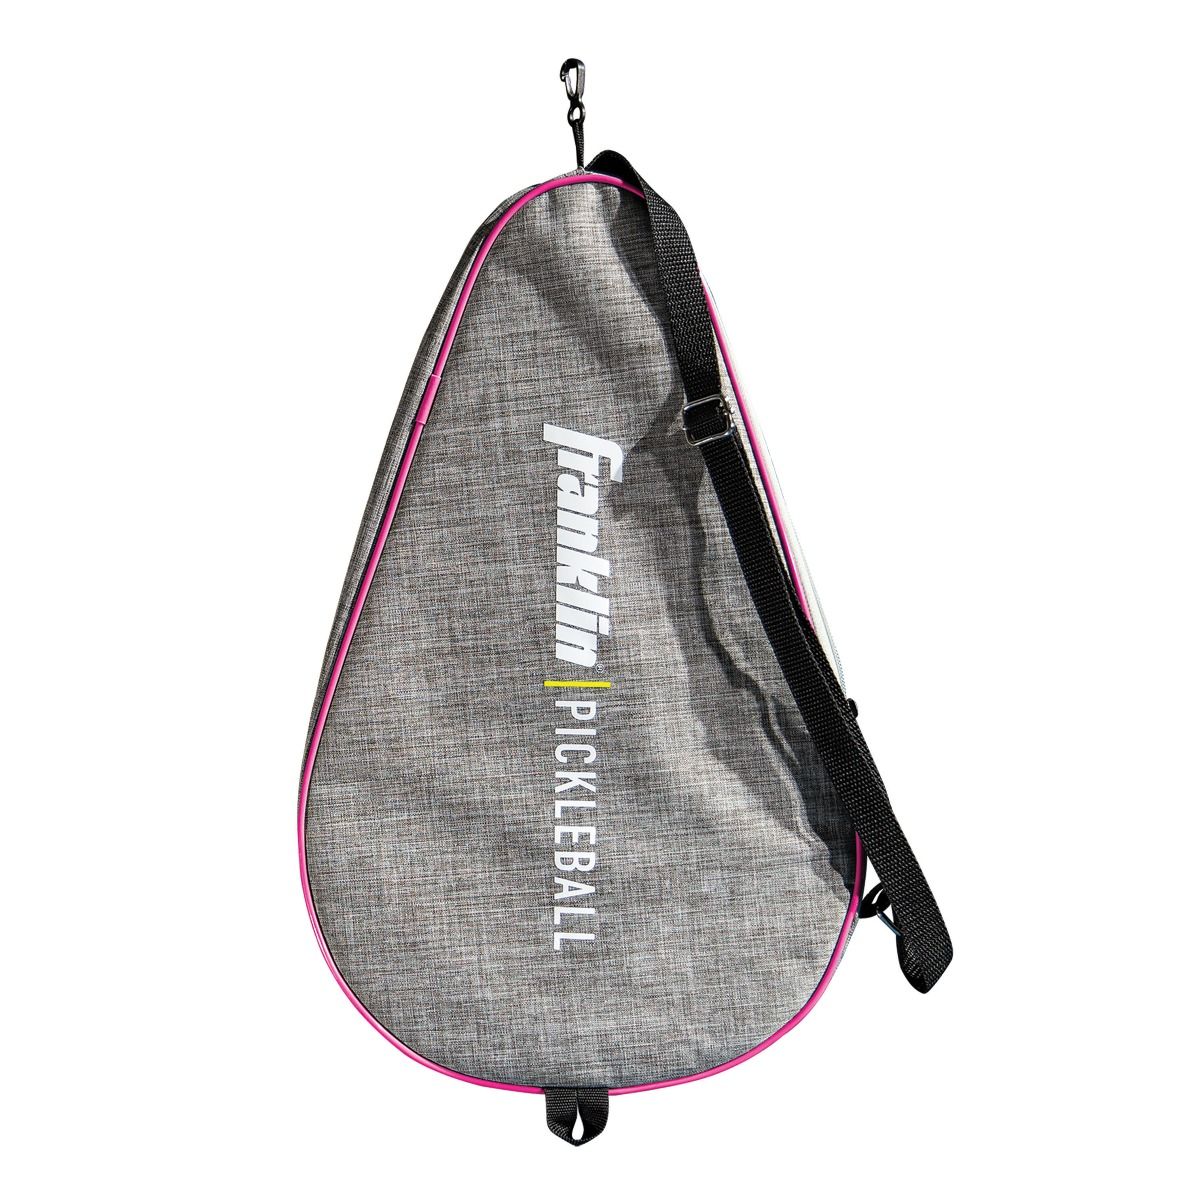 A convenient Franklin Pickleball Paddle Bag with a pink handle and padded for protection.